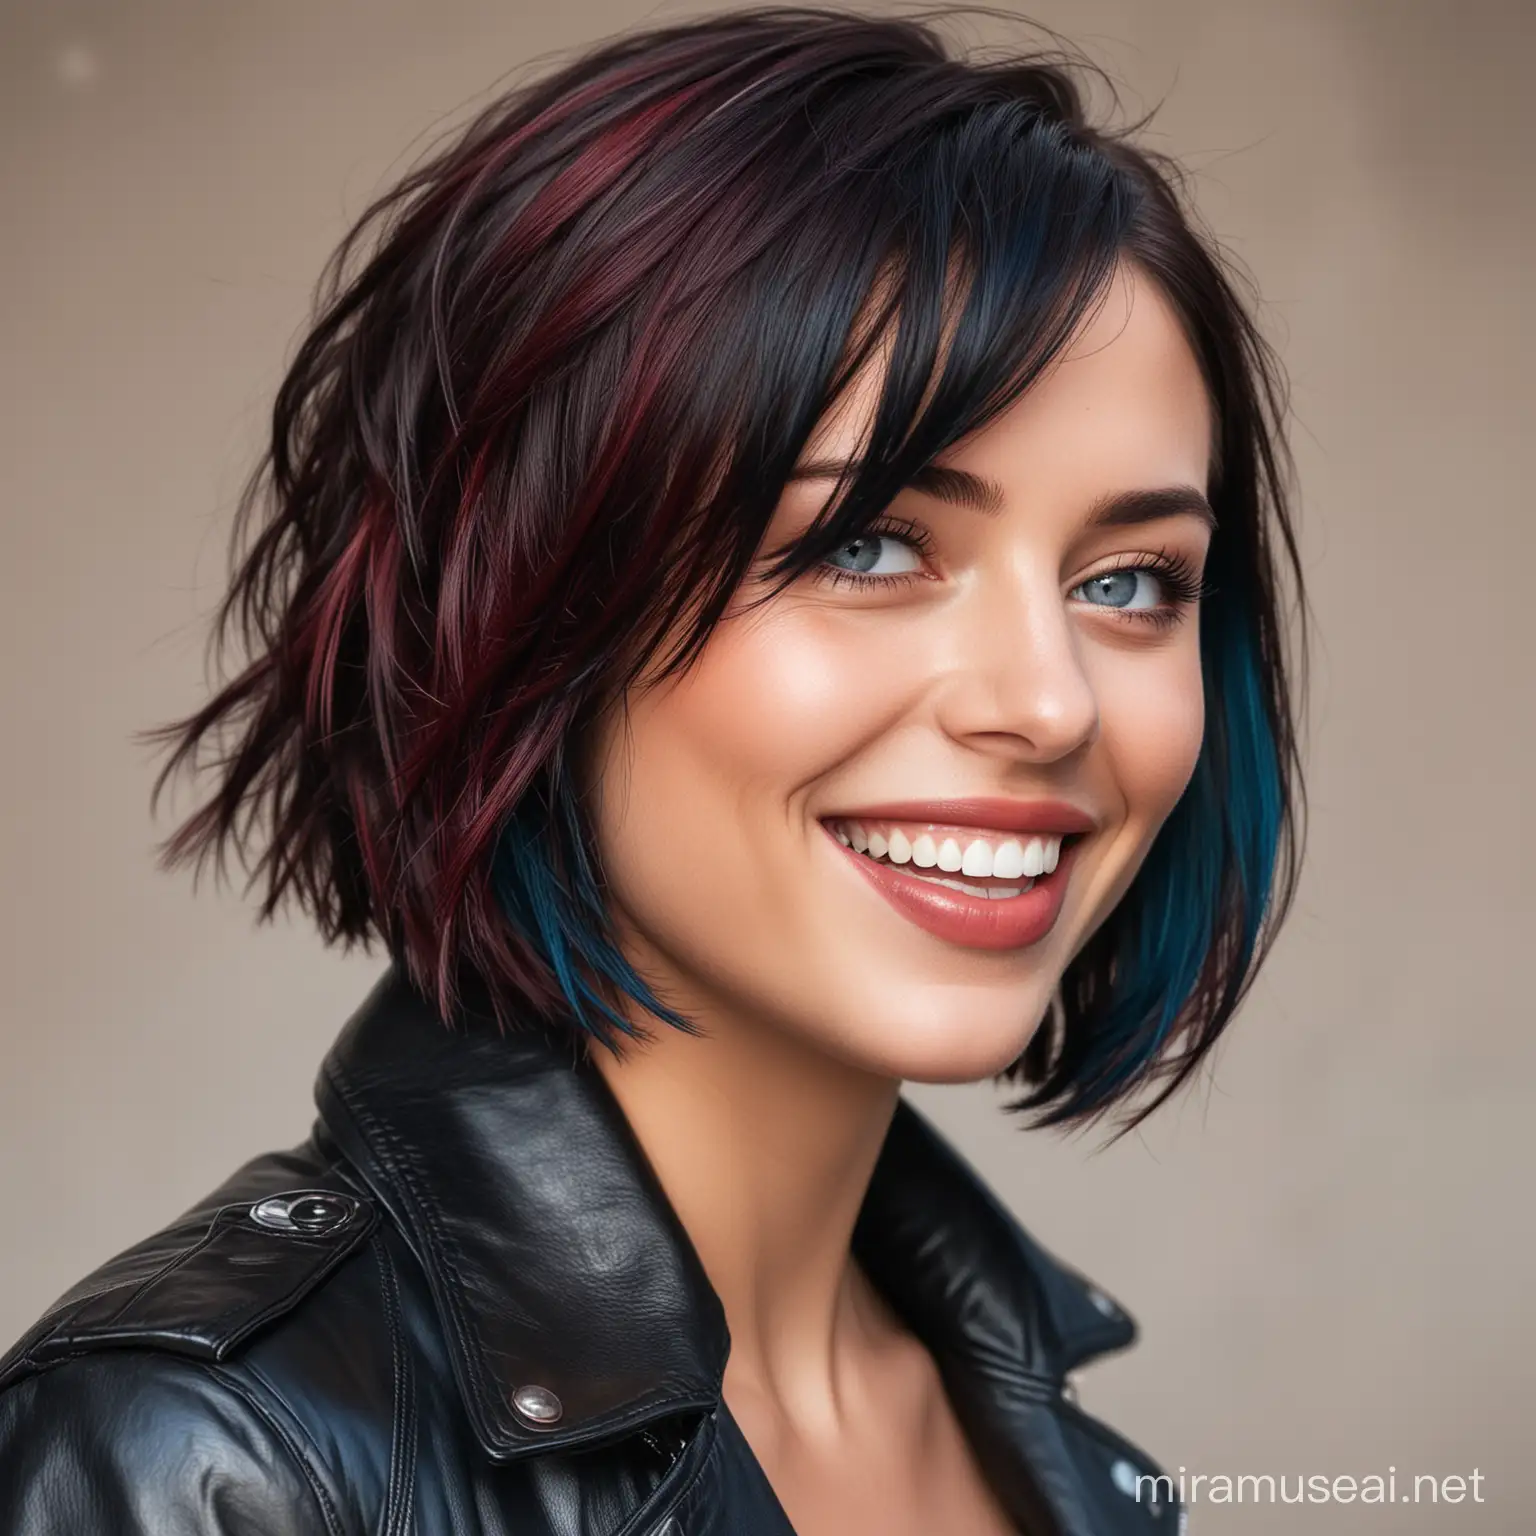 Laughing Woman with Dark Bob Hair and Leather Jacket in Profile